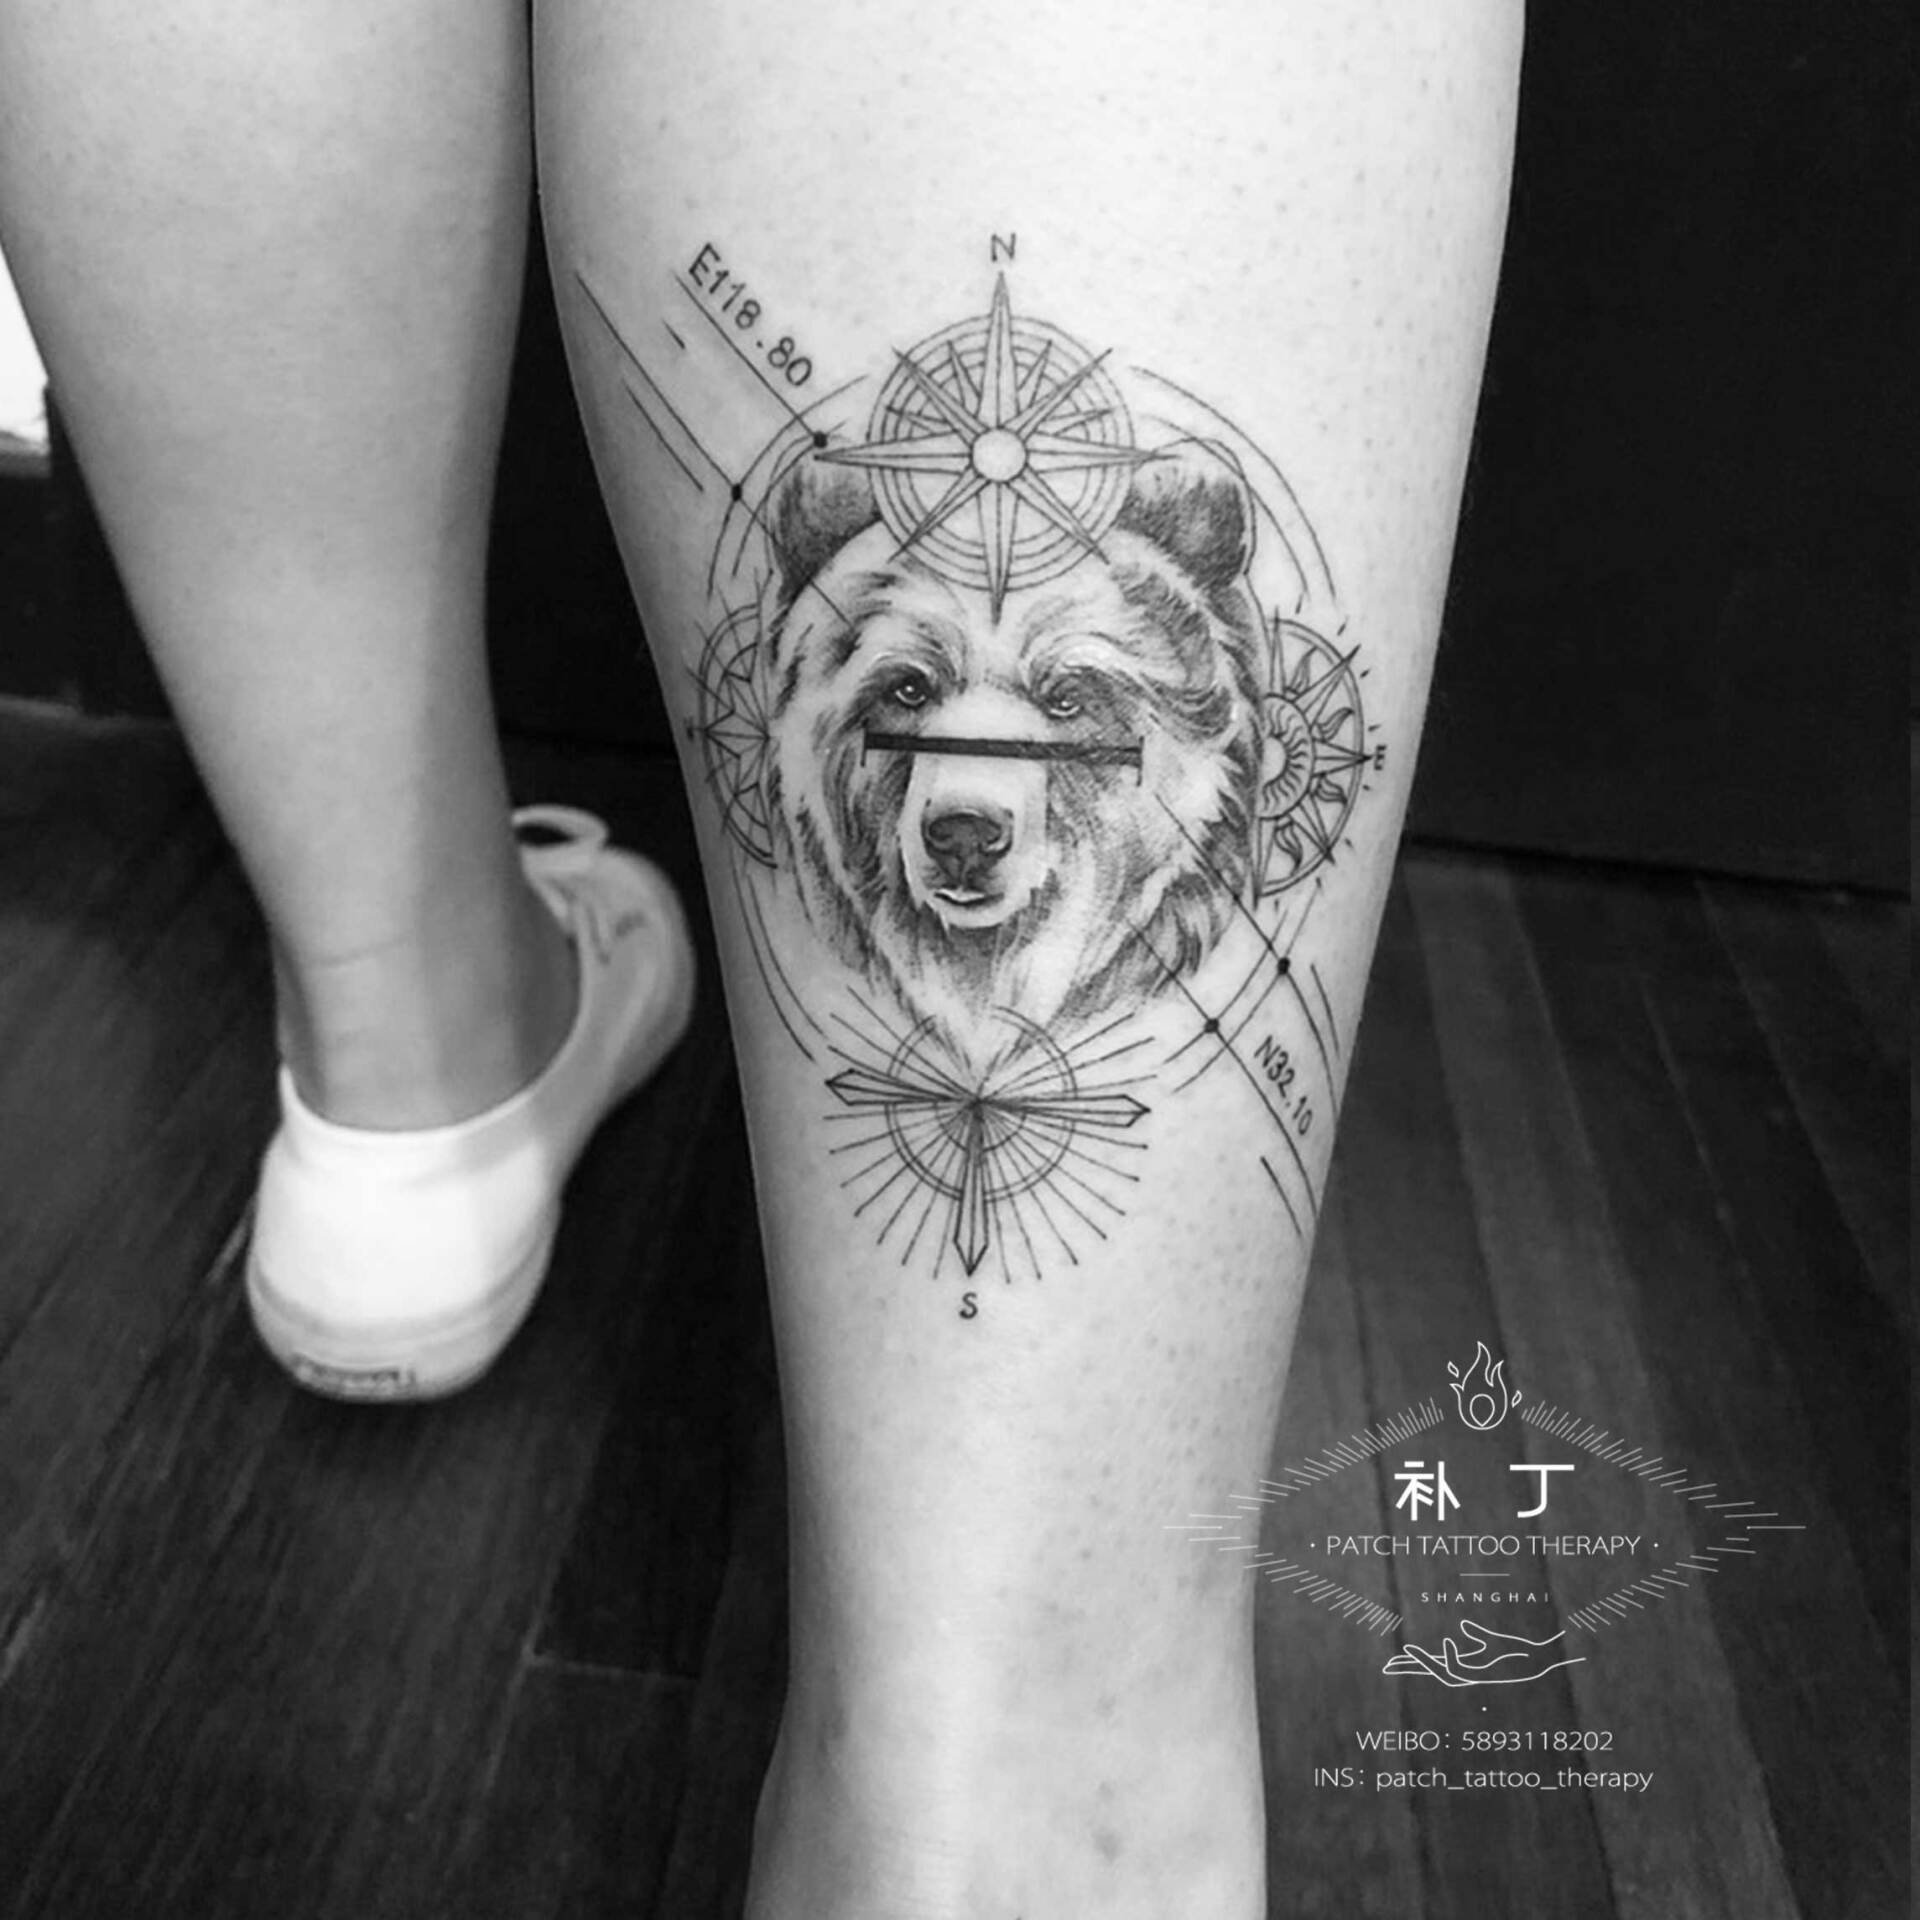 Calf tattoo of a grizzly bear with compass and text in geometric style designed by Jingxi Gu